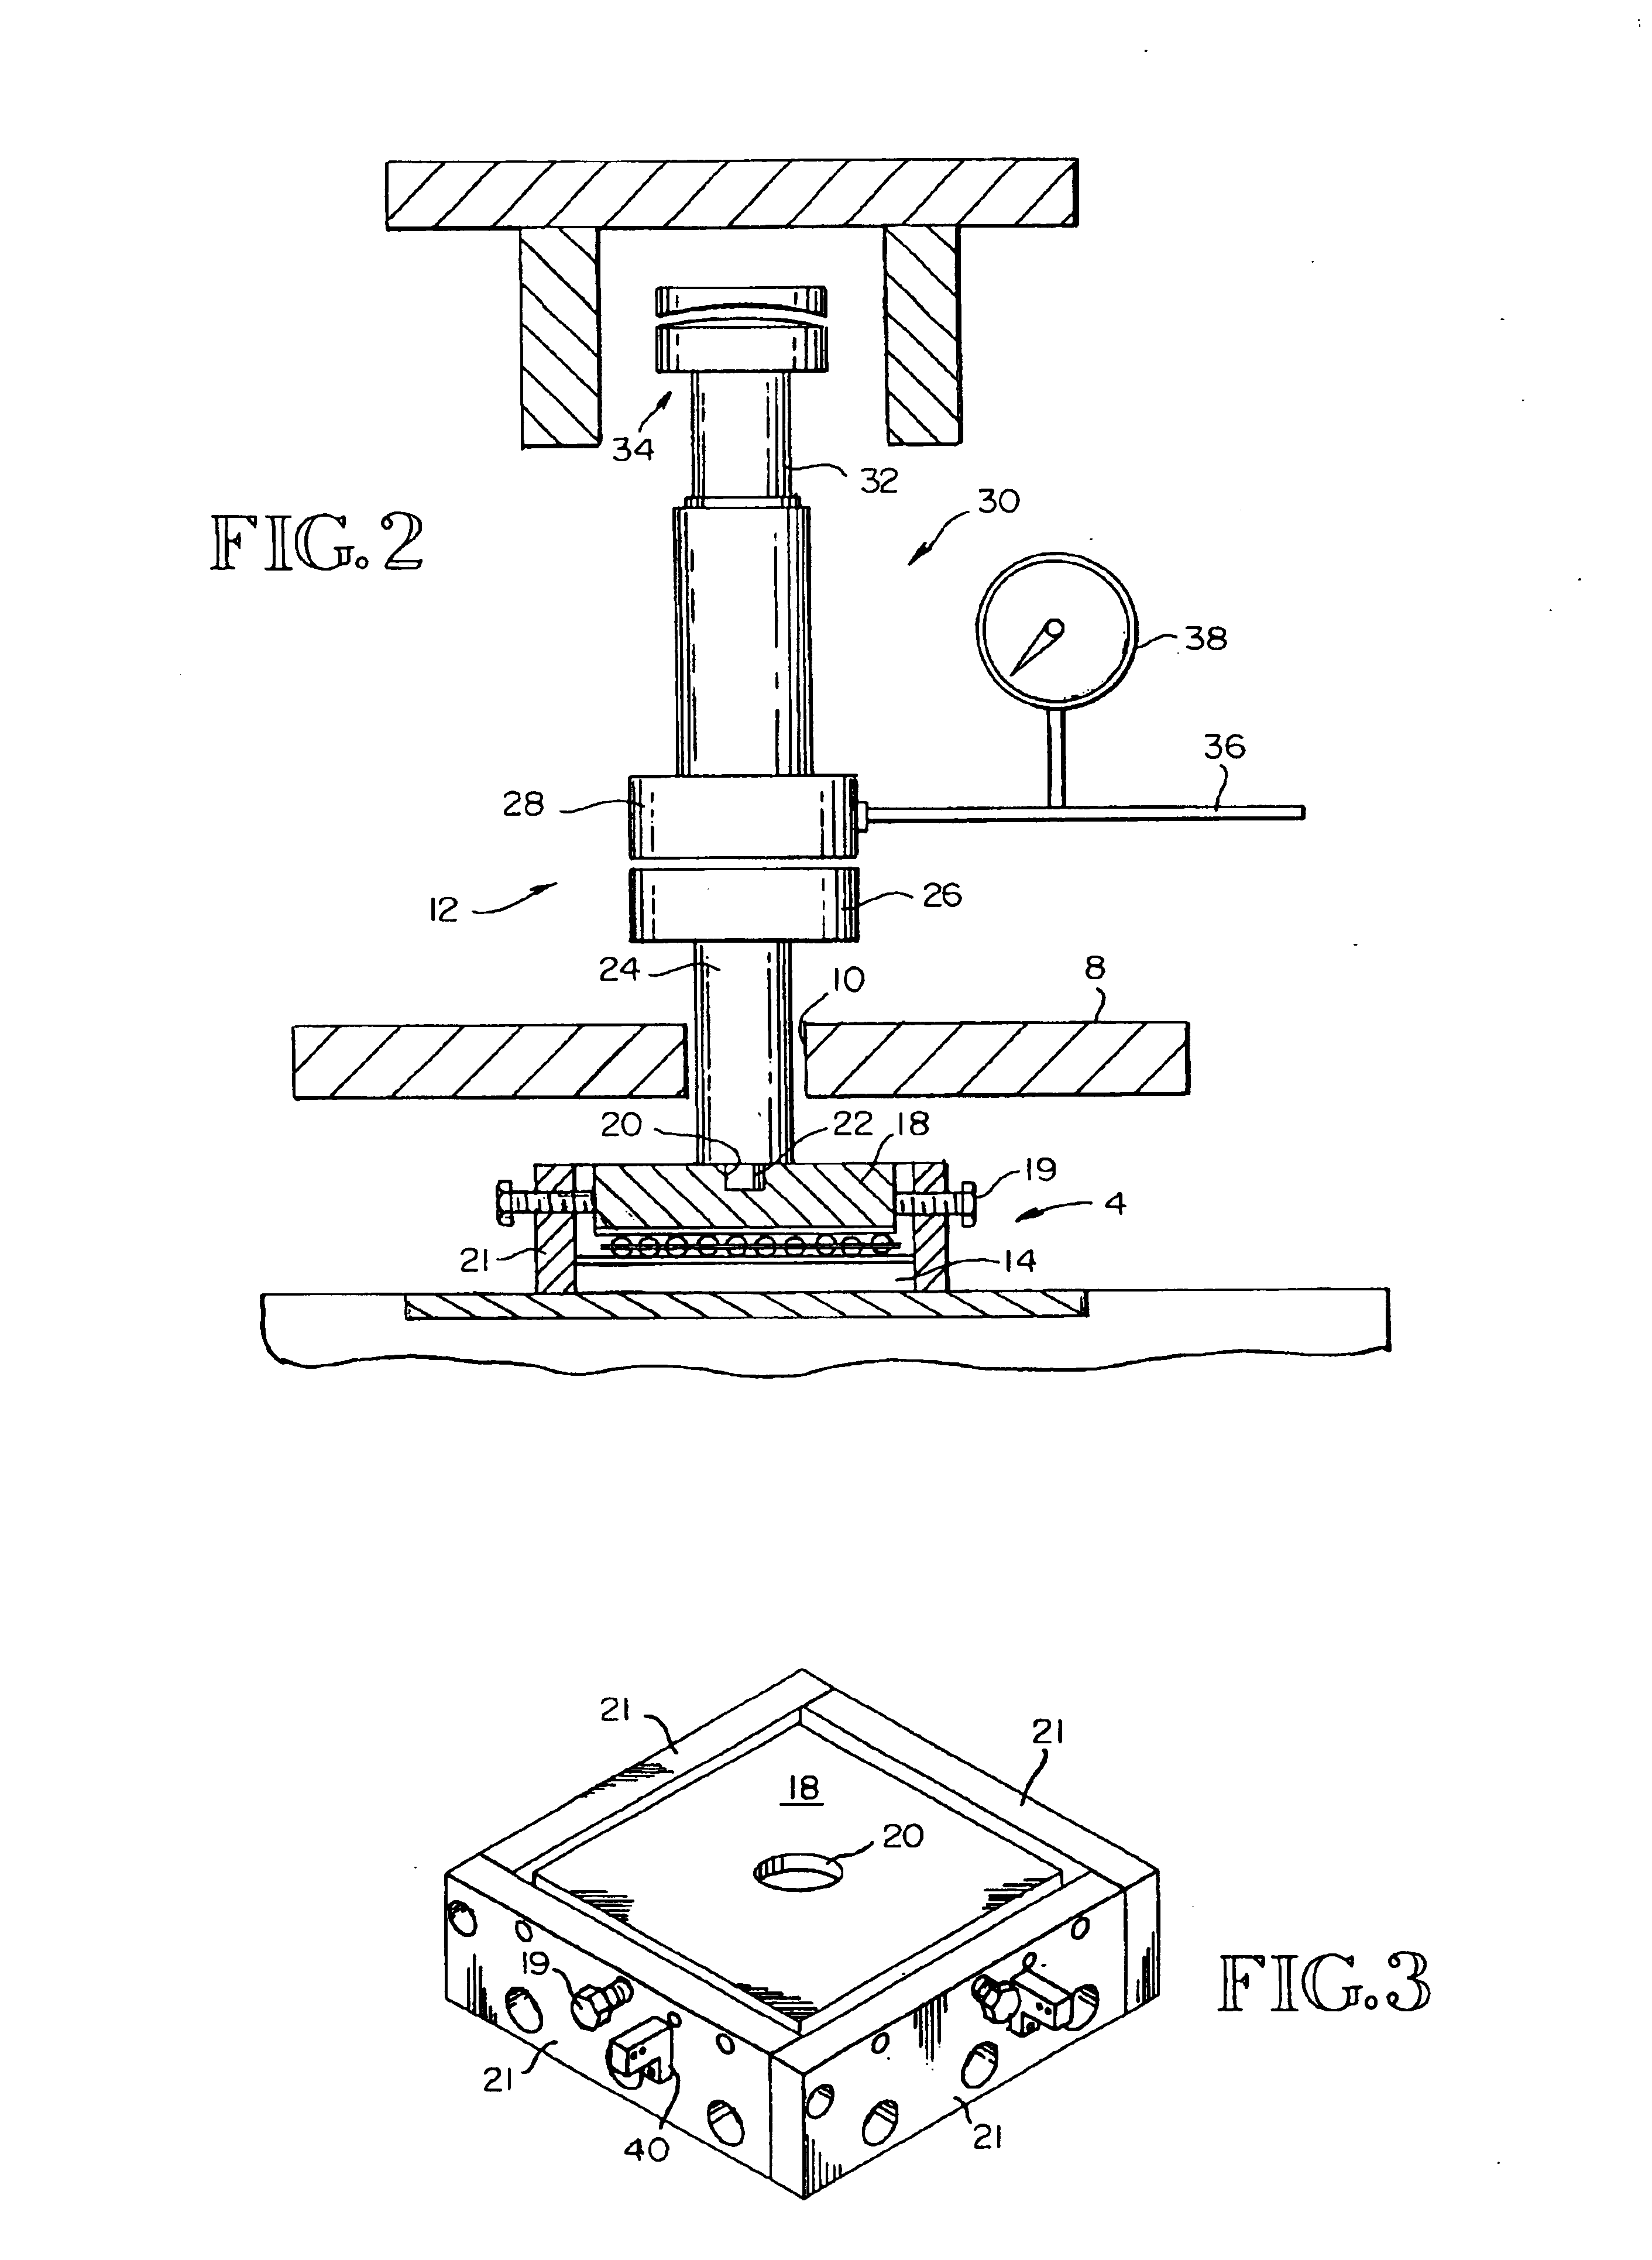 Alignment tool and method for aligning large machinery